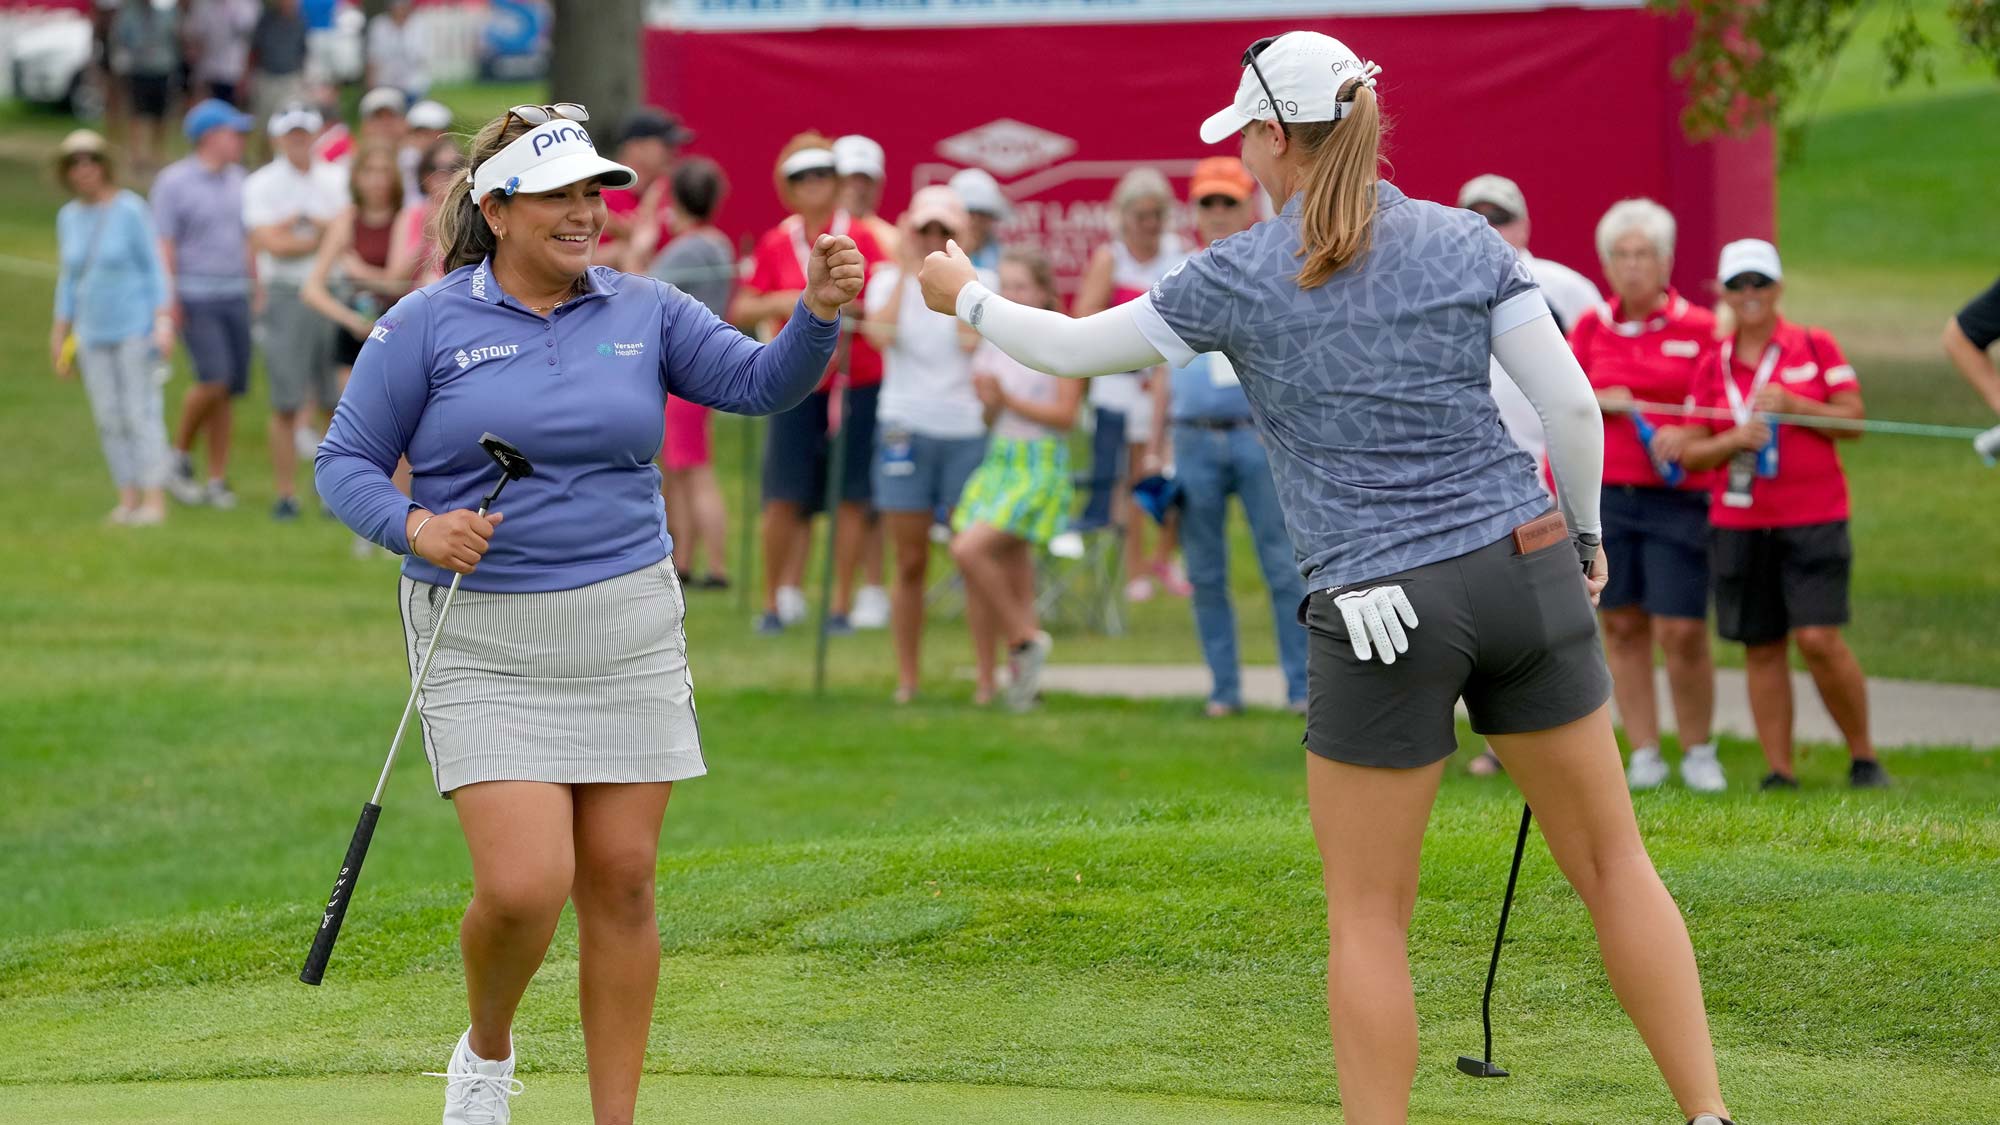  Lizette Salas of the United States (L) and Jennifer Kupcho of the United States celebrate after making birdie on the 17th green during the third round of the Dow Great Lakes Bay Invitational